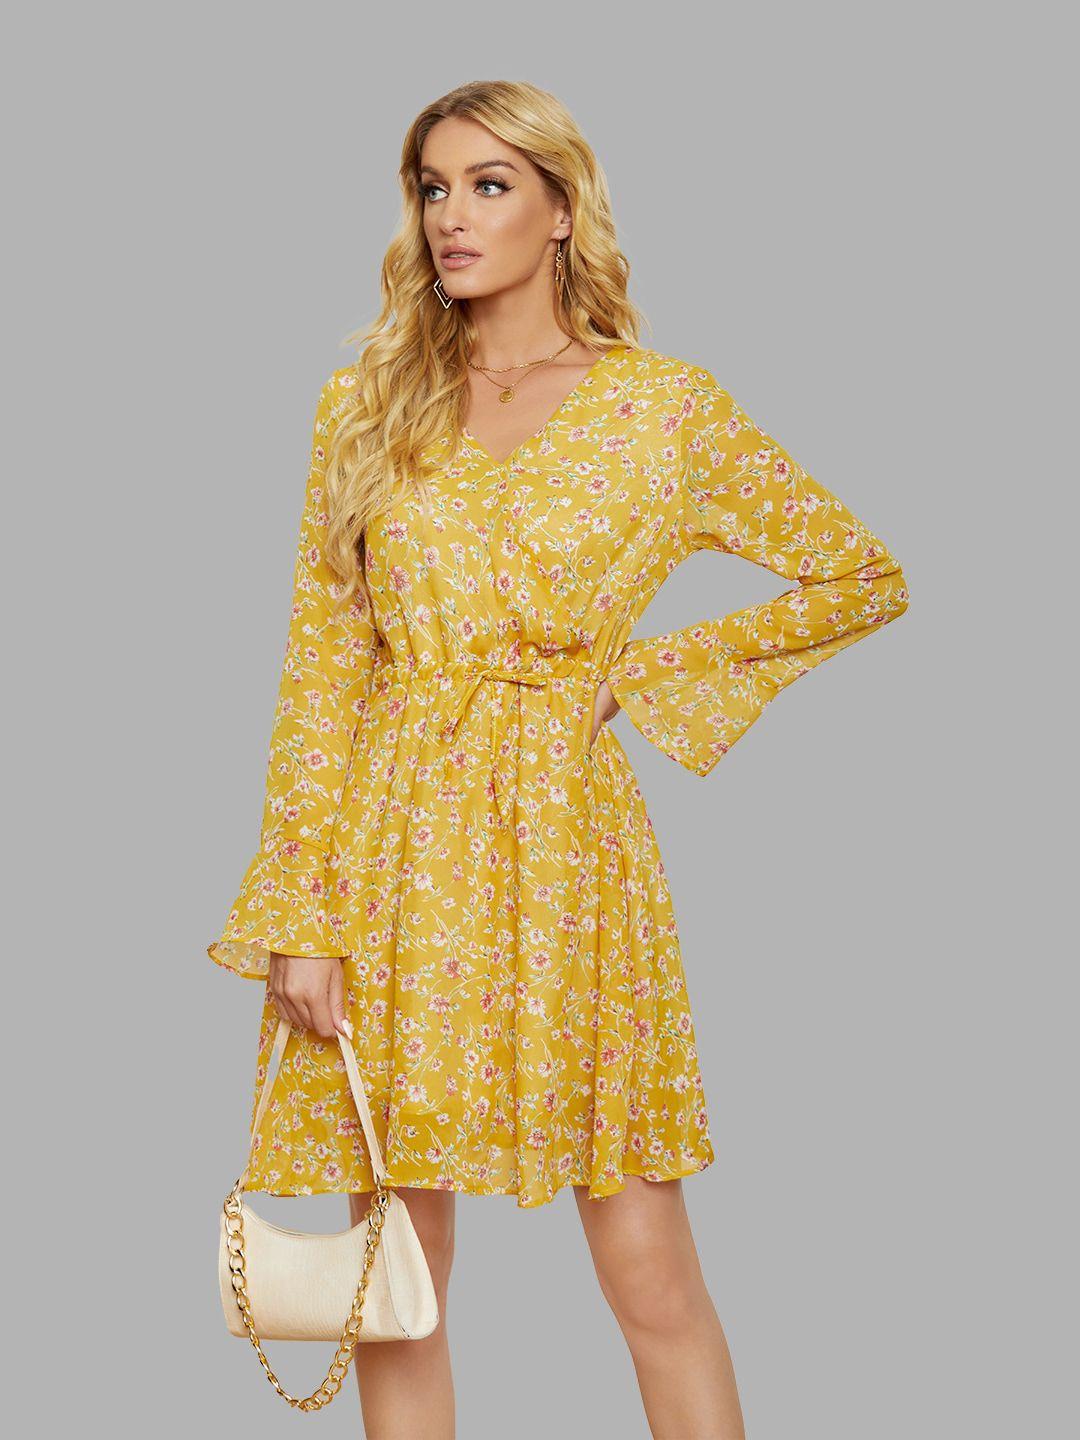 jc-collection-women-yellow-&-pink-floral-printed-dress